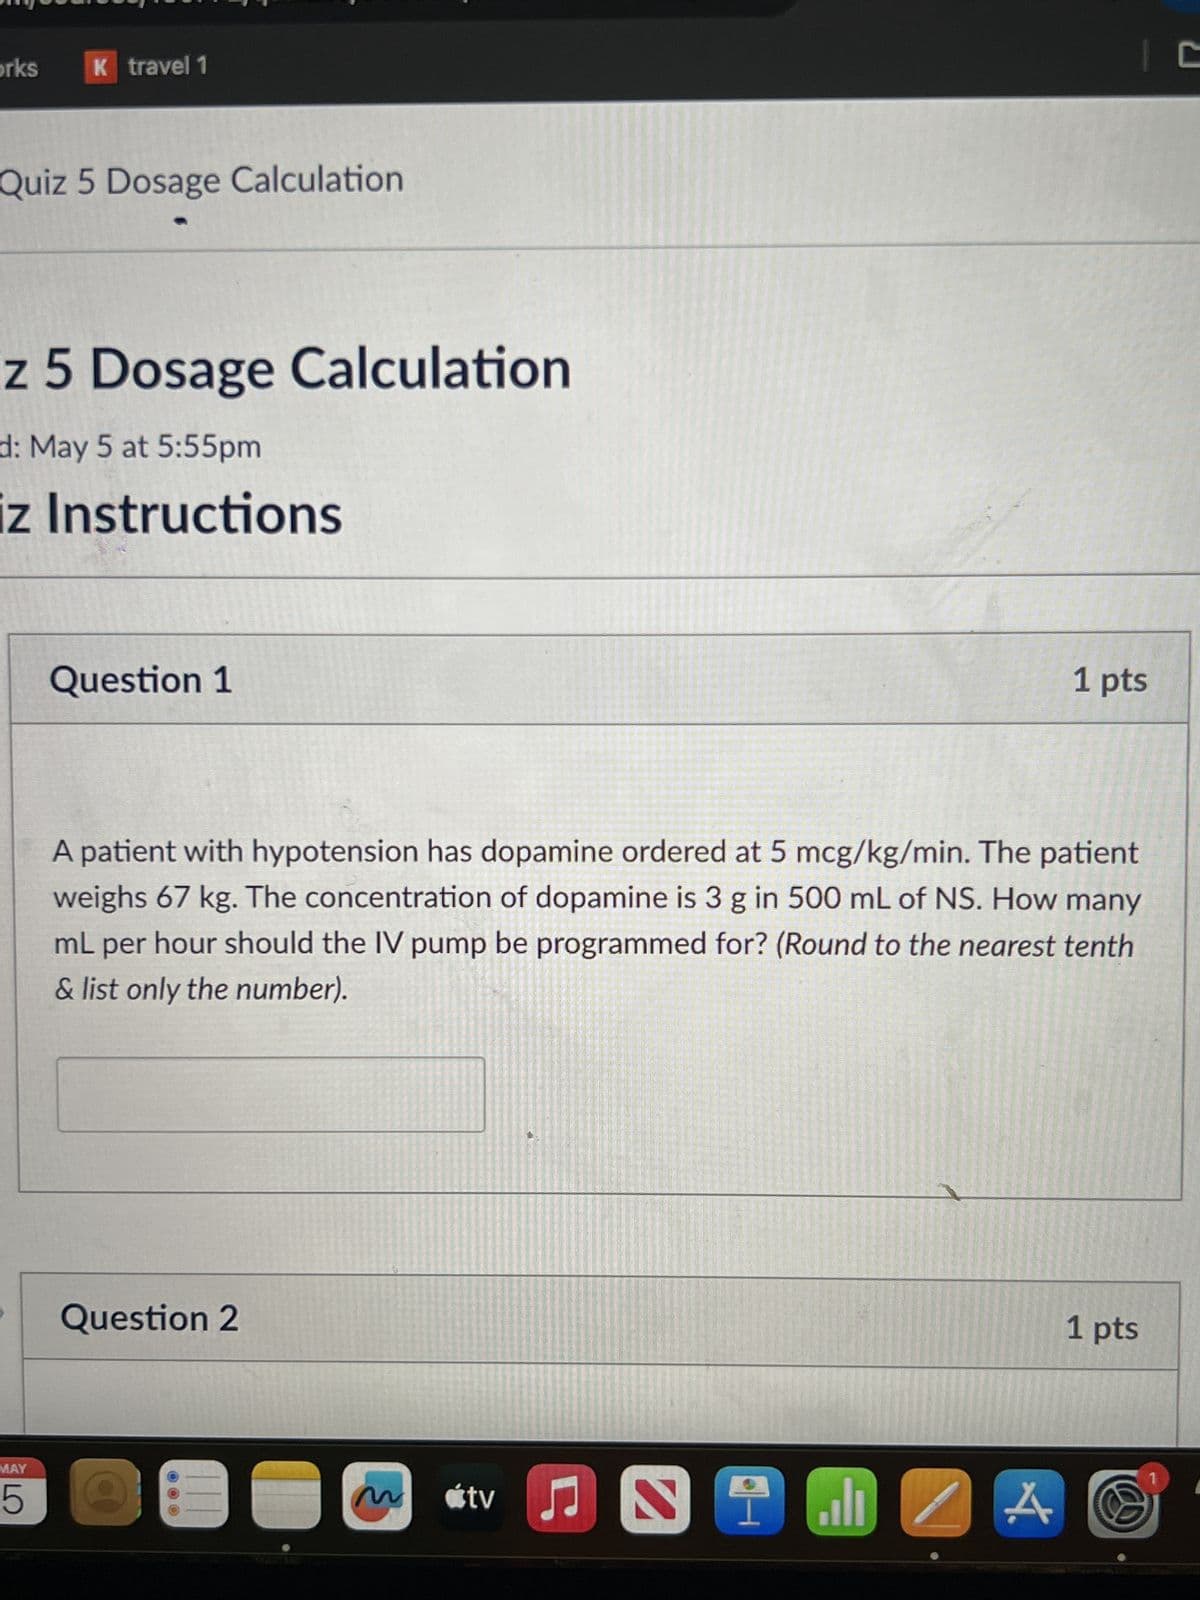 orks
K travel 1
Quiz 5 Dosage Calculation
z 5 Dosage Calculation
d: May 5 at 5:55pm
iz Instructions
MAY
5
Question 1
1 pts
A patient with hypotension has dopamine ordered at 5 mcg/kg/min. The patient
weighs 67 kg. The concentration of dopamine is 3 g in 500 mL of NS. How many
mL per hour should the IV pump be programmed for? (Round to the nearest tenth
& list only the number).
Question 2
M
tv♫
A
1 pts
C